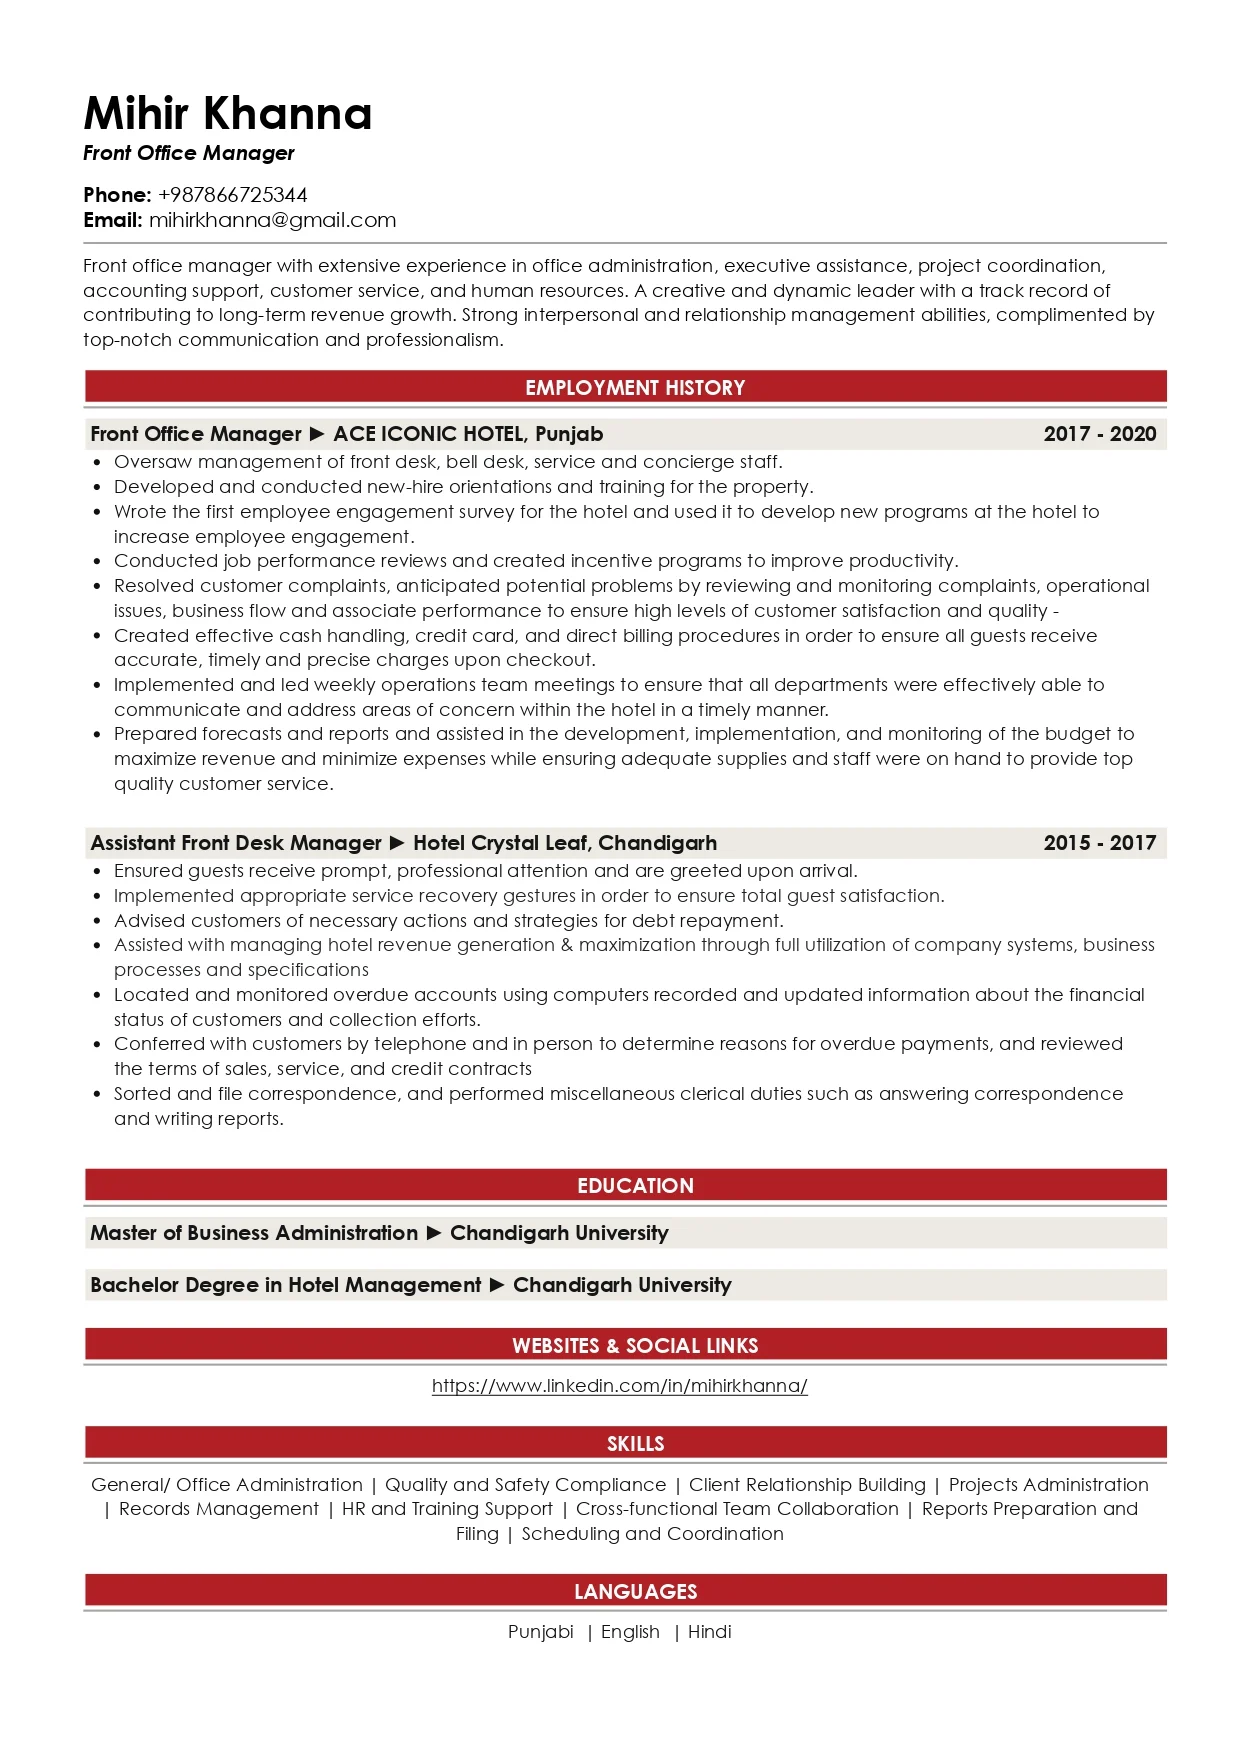 Sample Resume of Front Office Manager | Free Resume Templates & Samples on Resumod.co